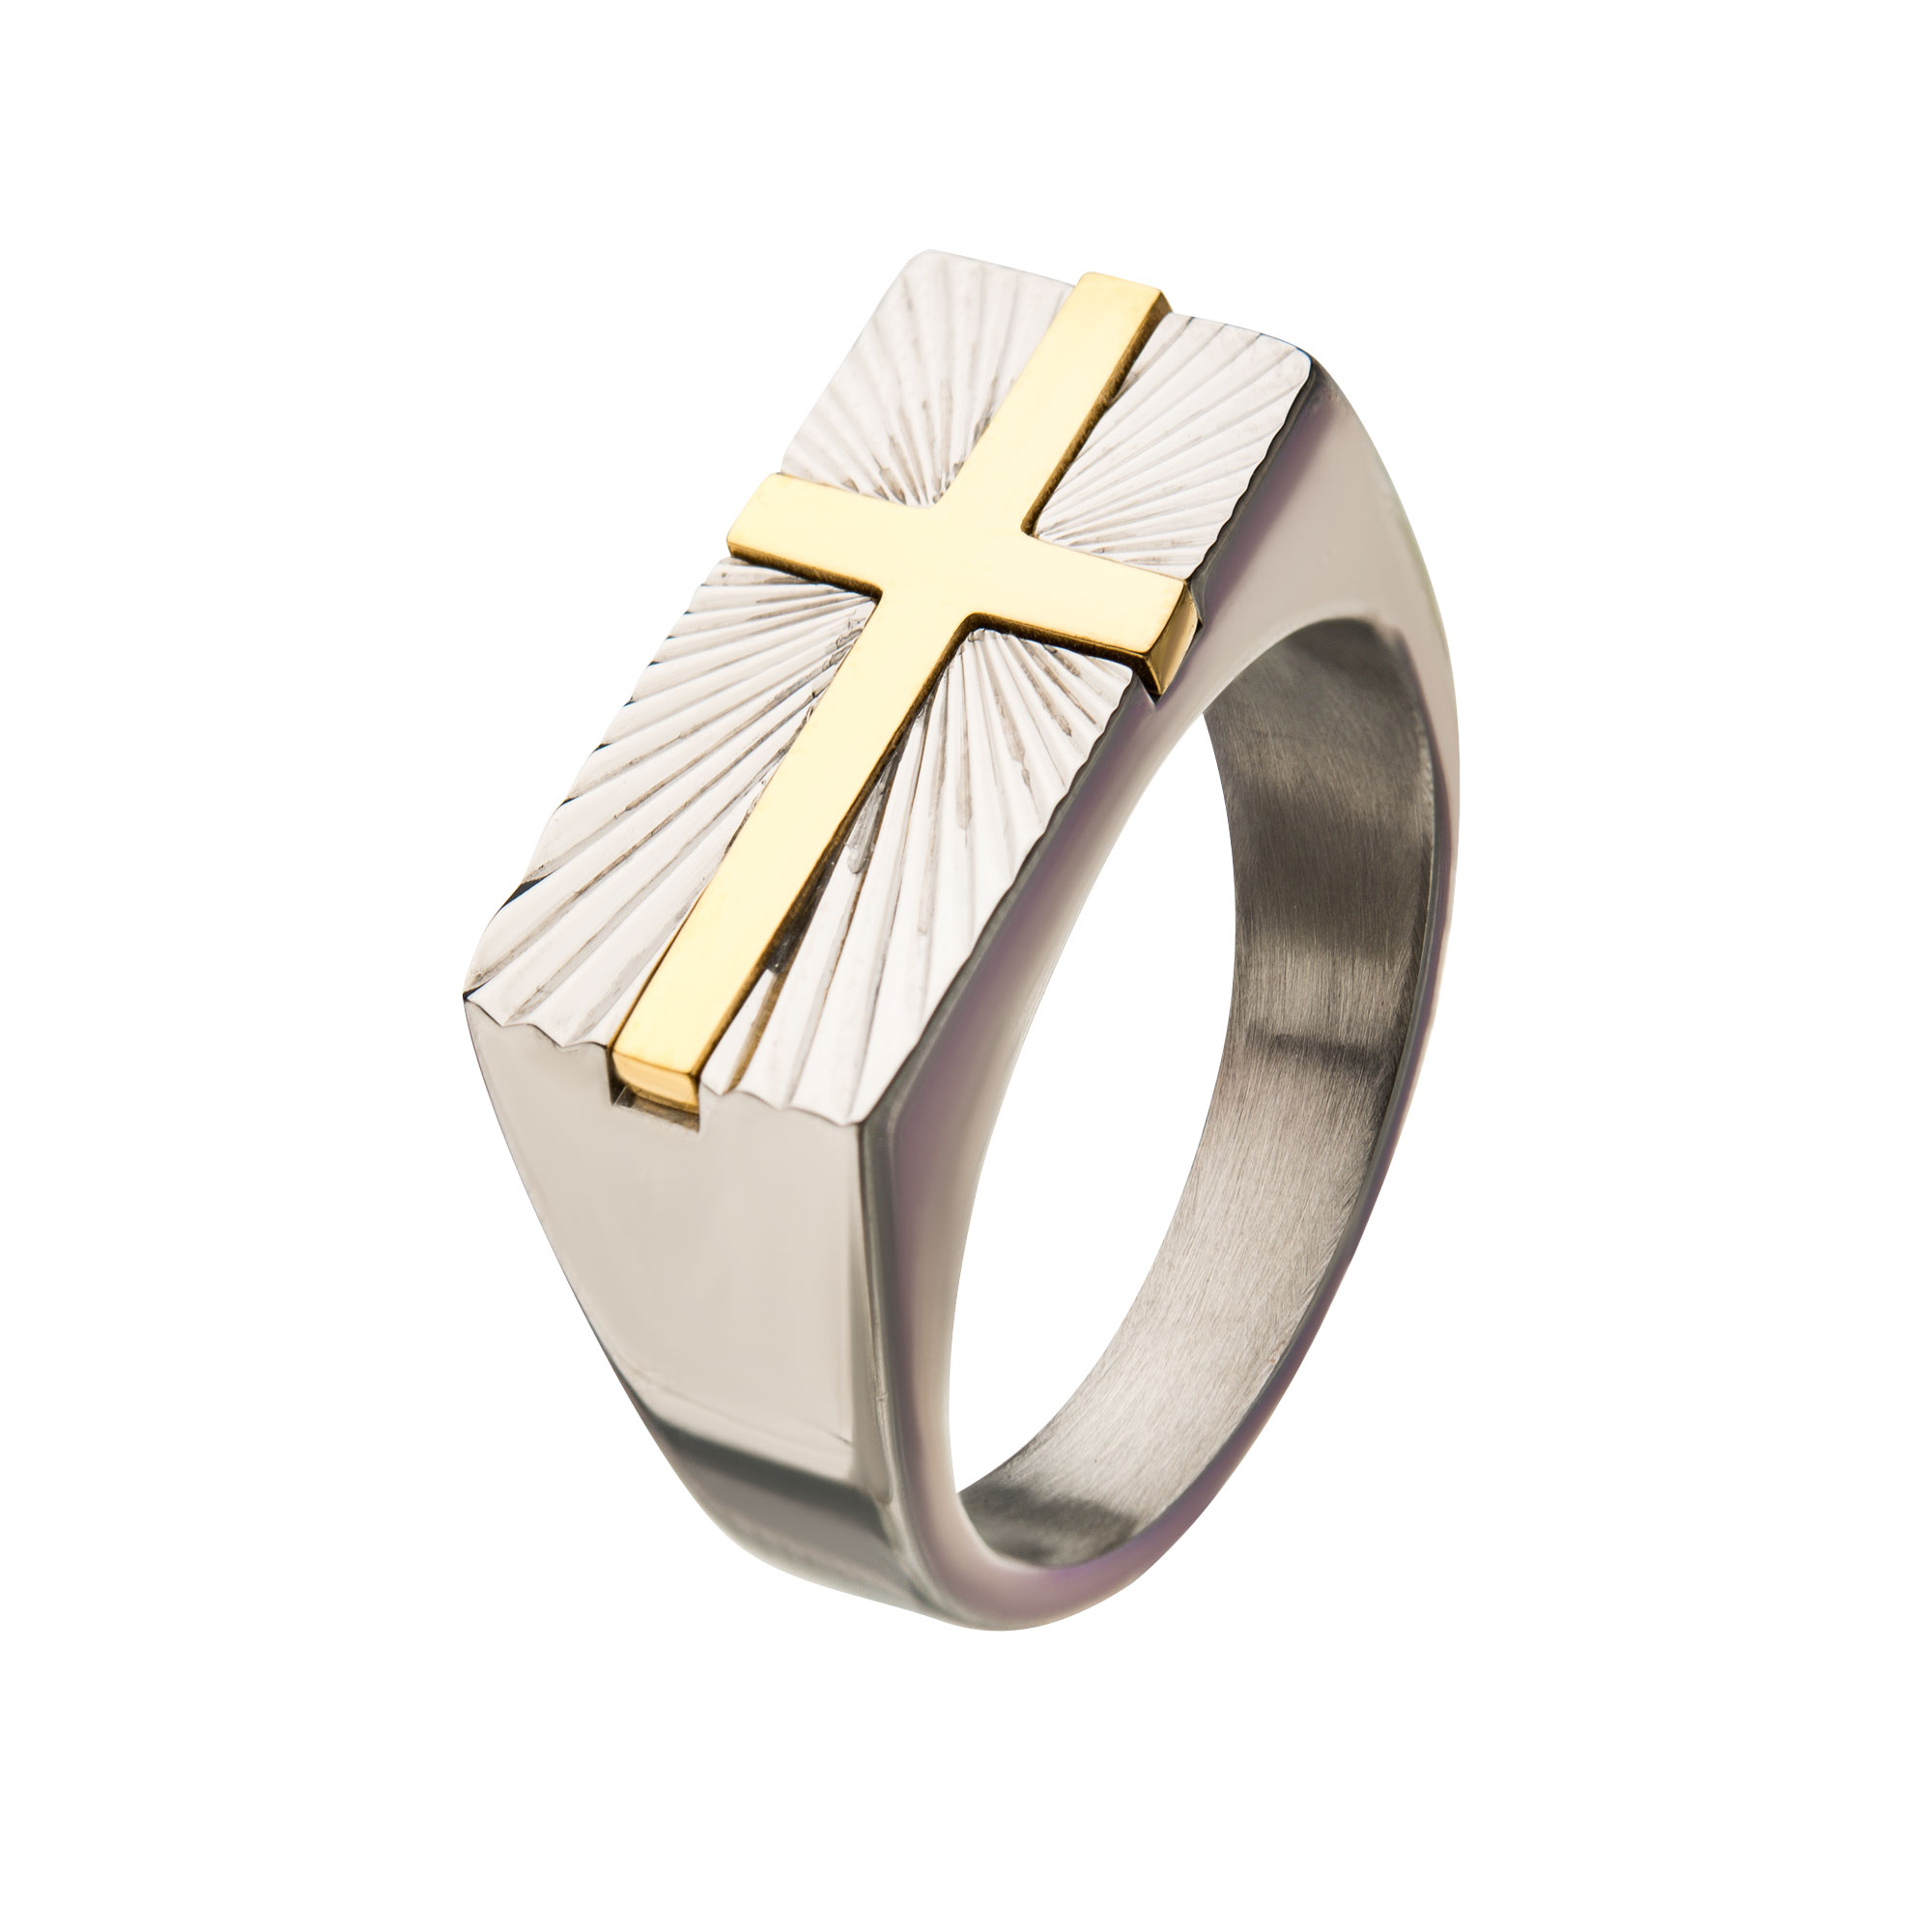 Stainless Steel with  Gold Plated Transfiguration Cross Ring Morin Jewelers Southbridge, MA